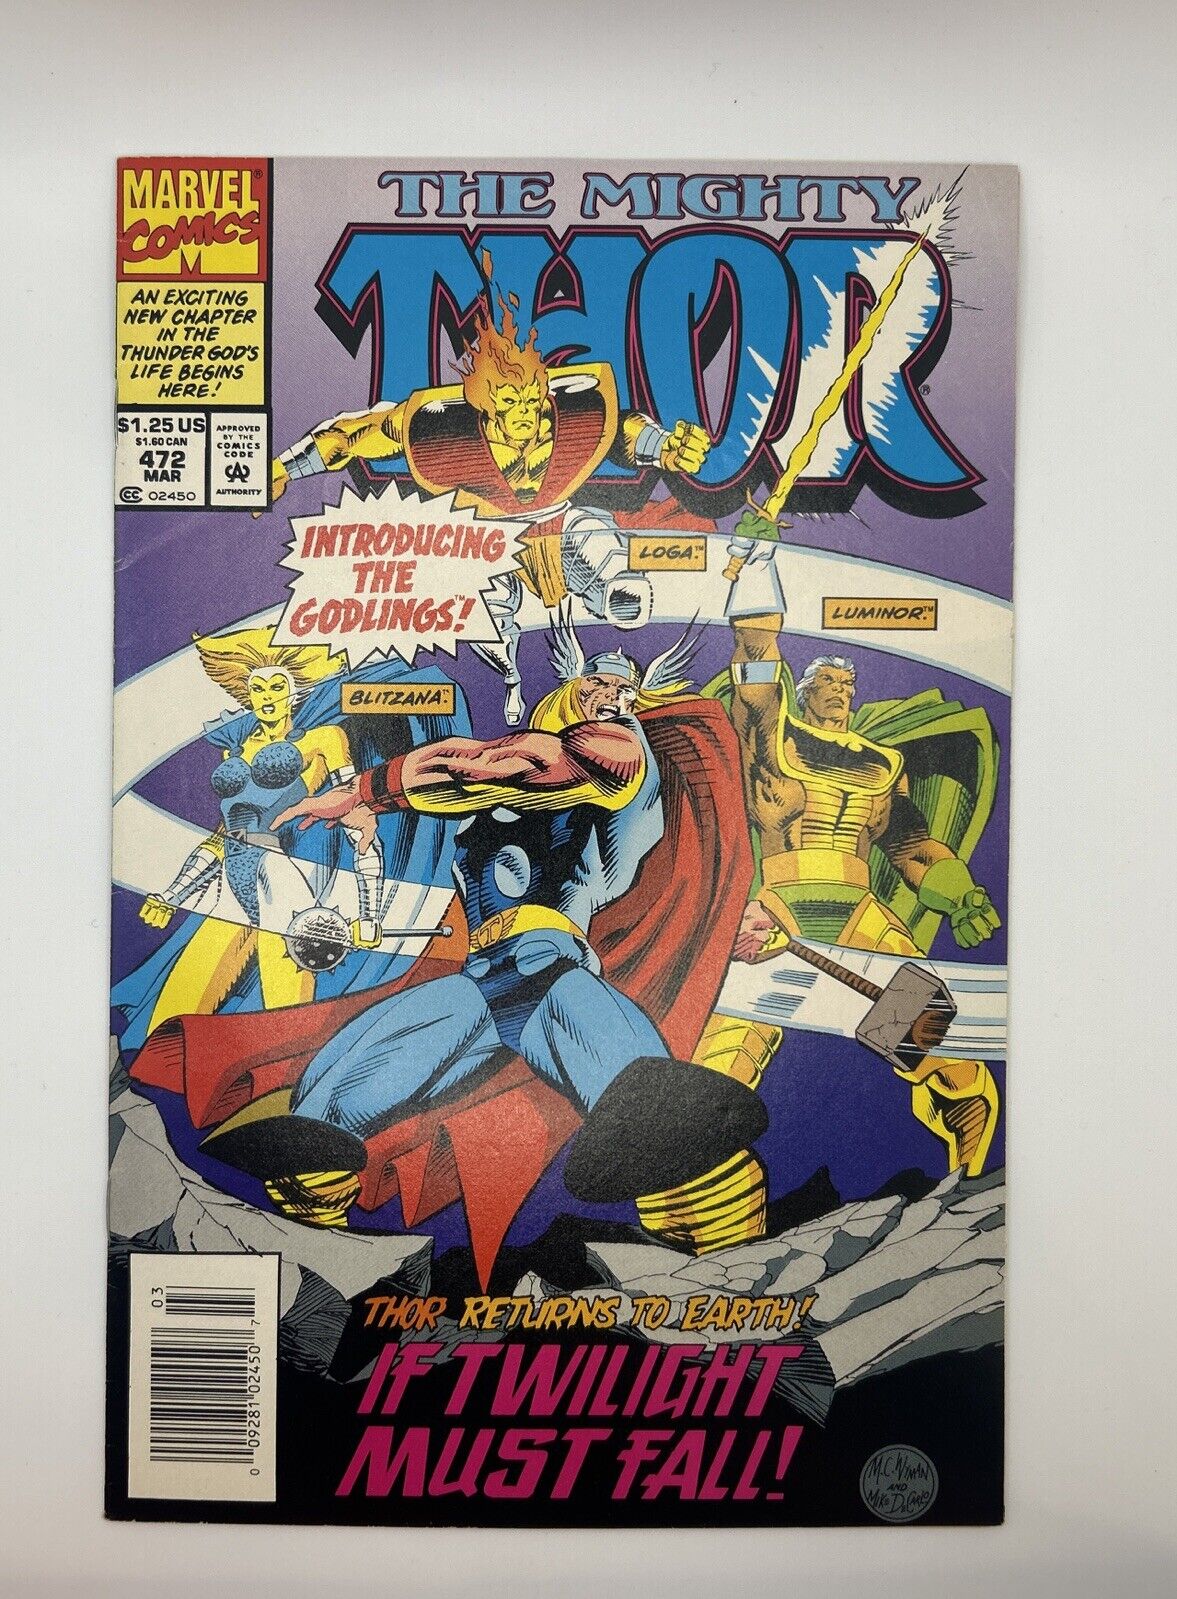 The Mighty Thor Vol 1 # 472 1994